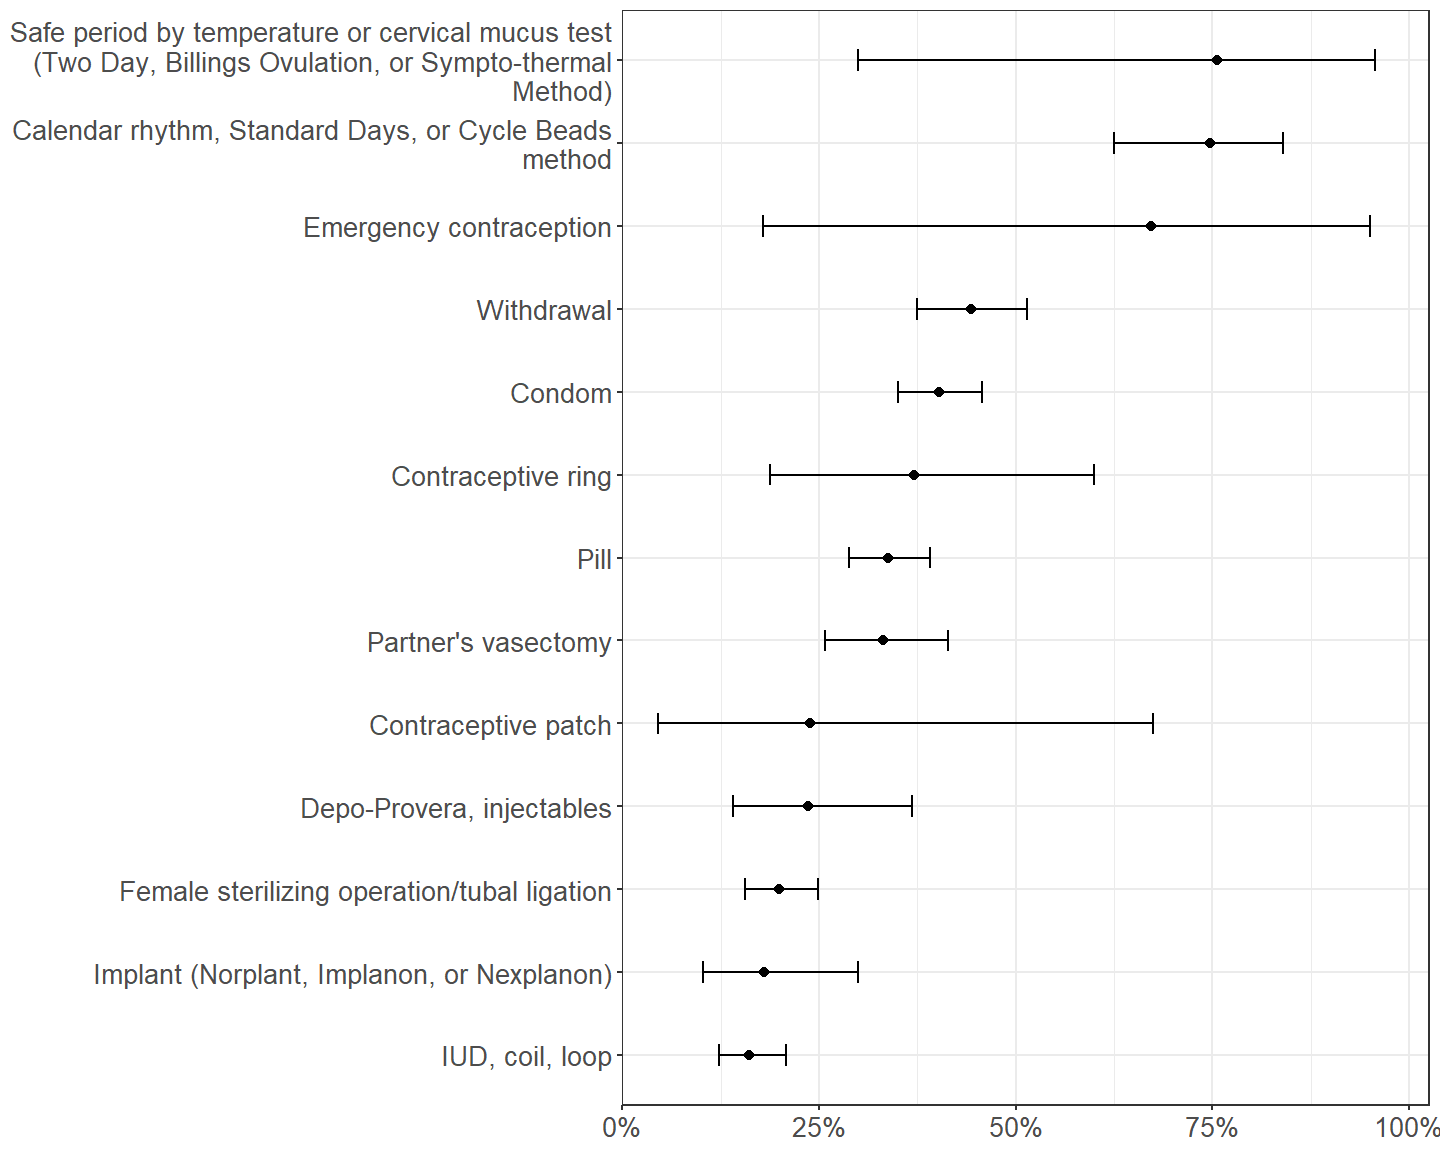 Proportion using another method of contraception among females using each method of contraception during last intercourse with a male in the past 3 months.